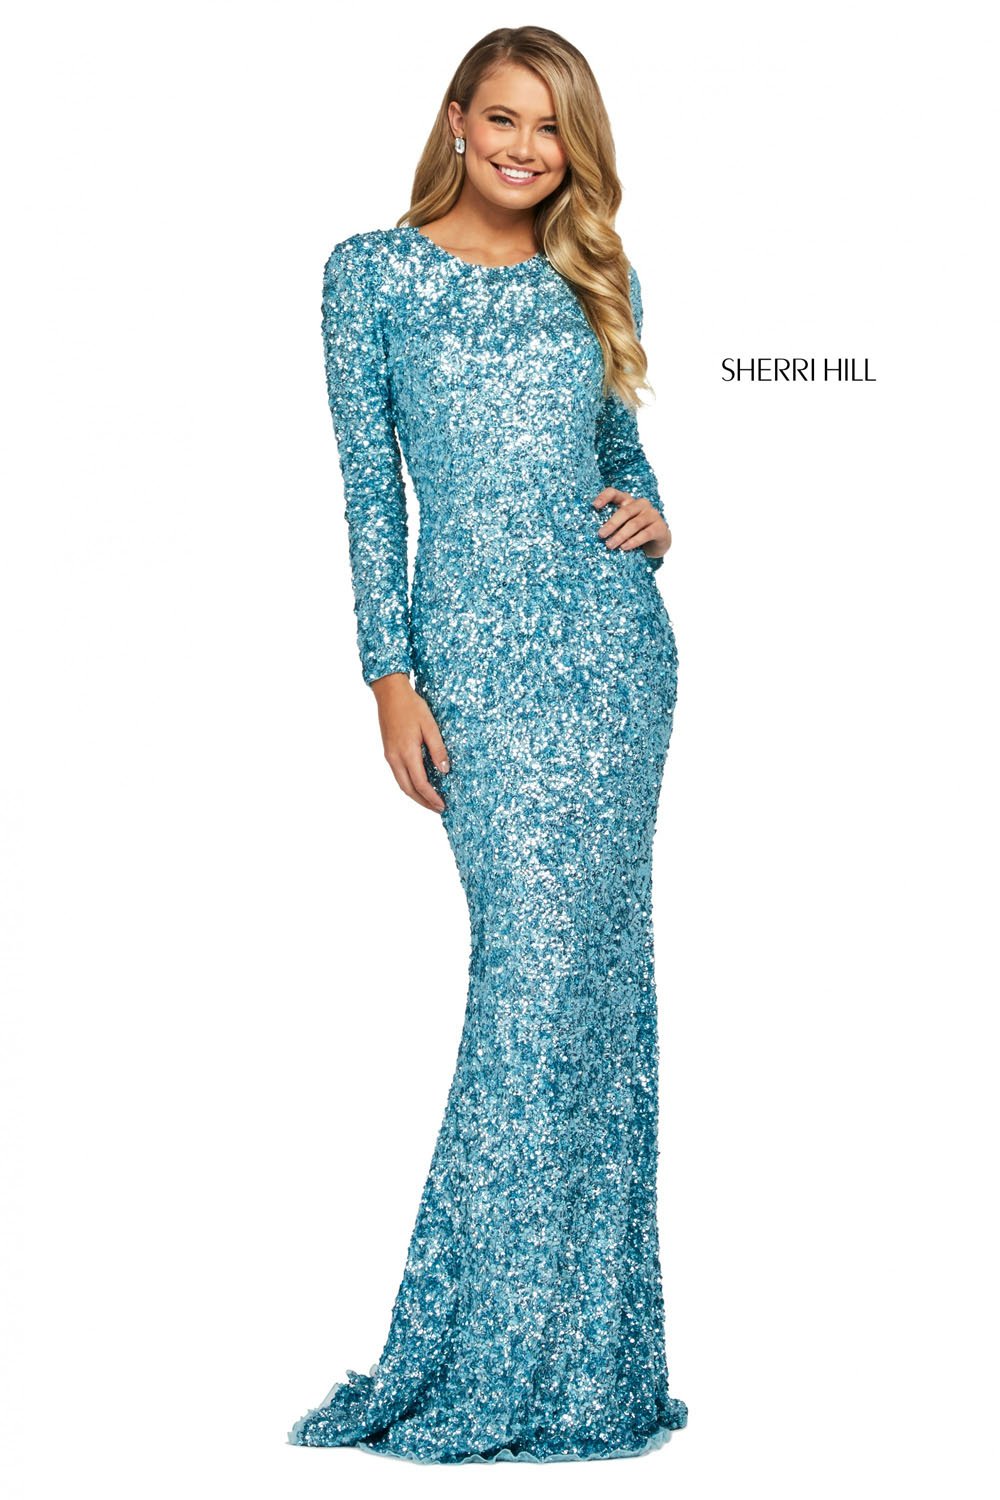 Sherri Hill 53447 dress images in these colors: Silver, Black, Red, Emerald, Peacock, Coral, Burgundy, Lilac, Light Blue, Gold, Navy.